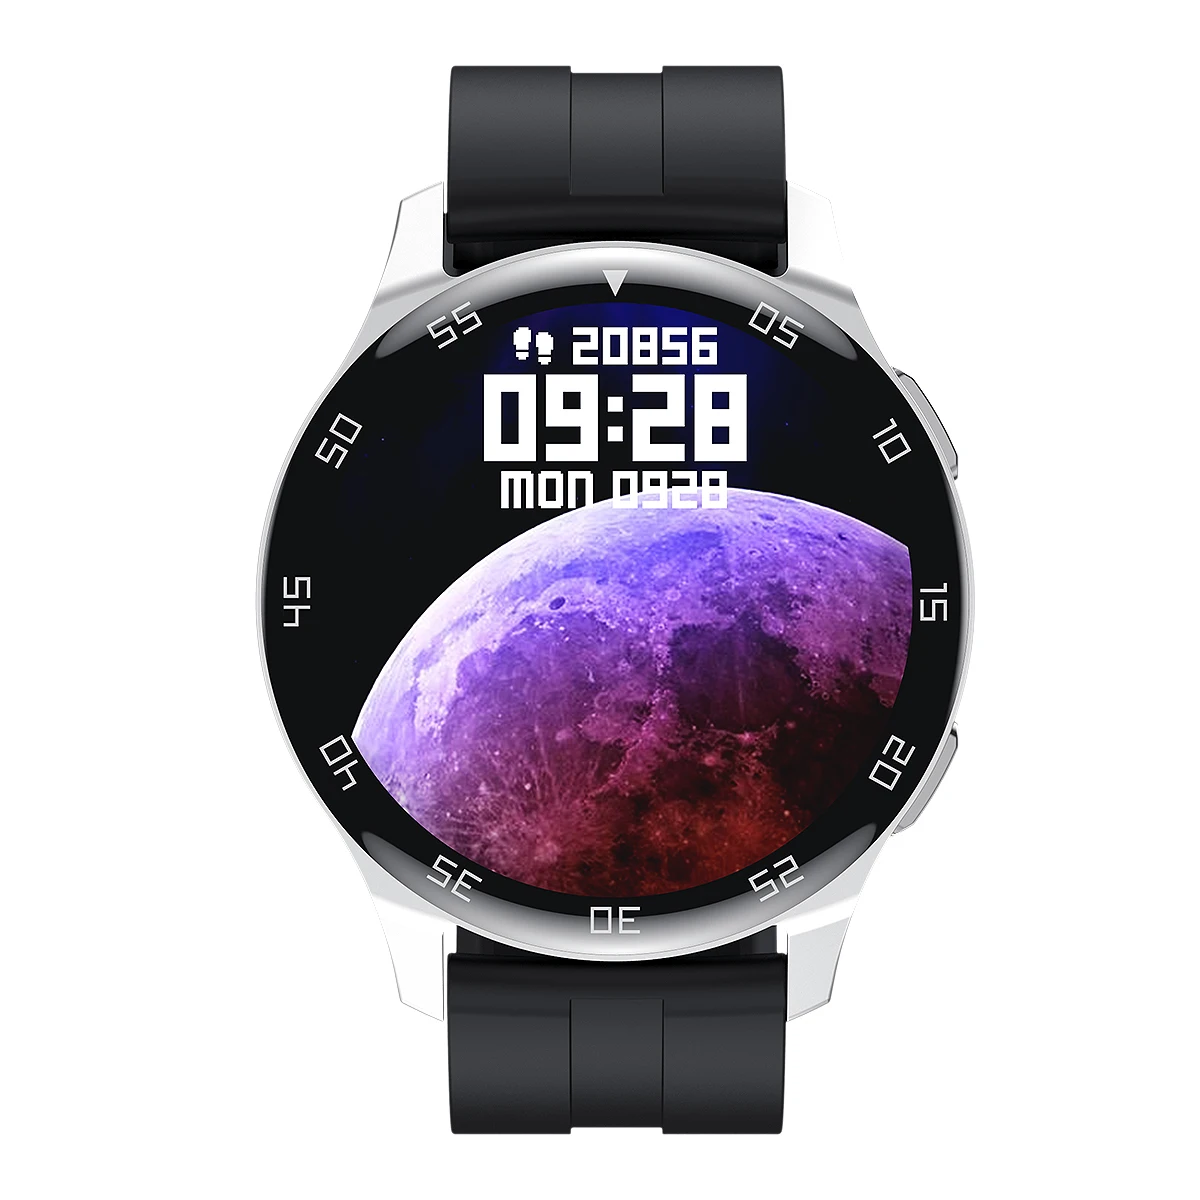 REWARD shenzhen smart watch with blood monitor receiving and text sport fitness smart watches relogio inteligente From m.alibaba.com